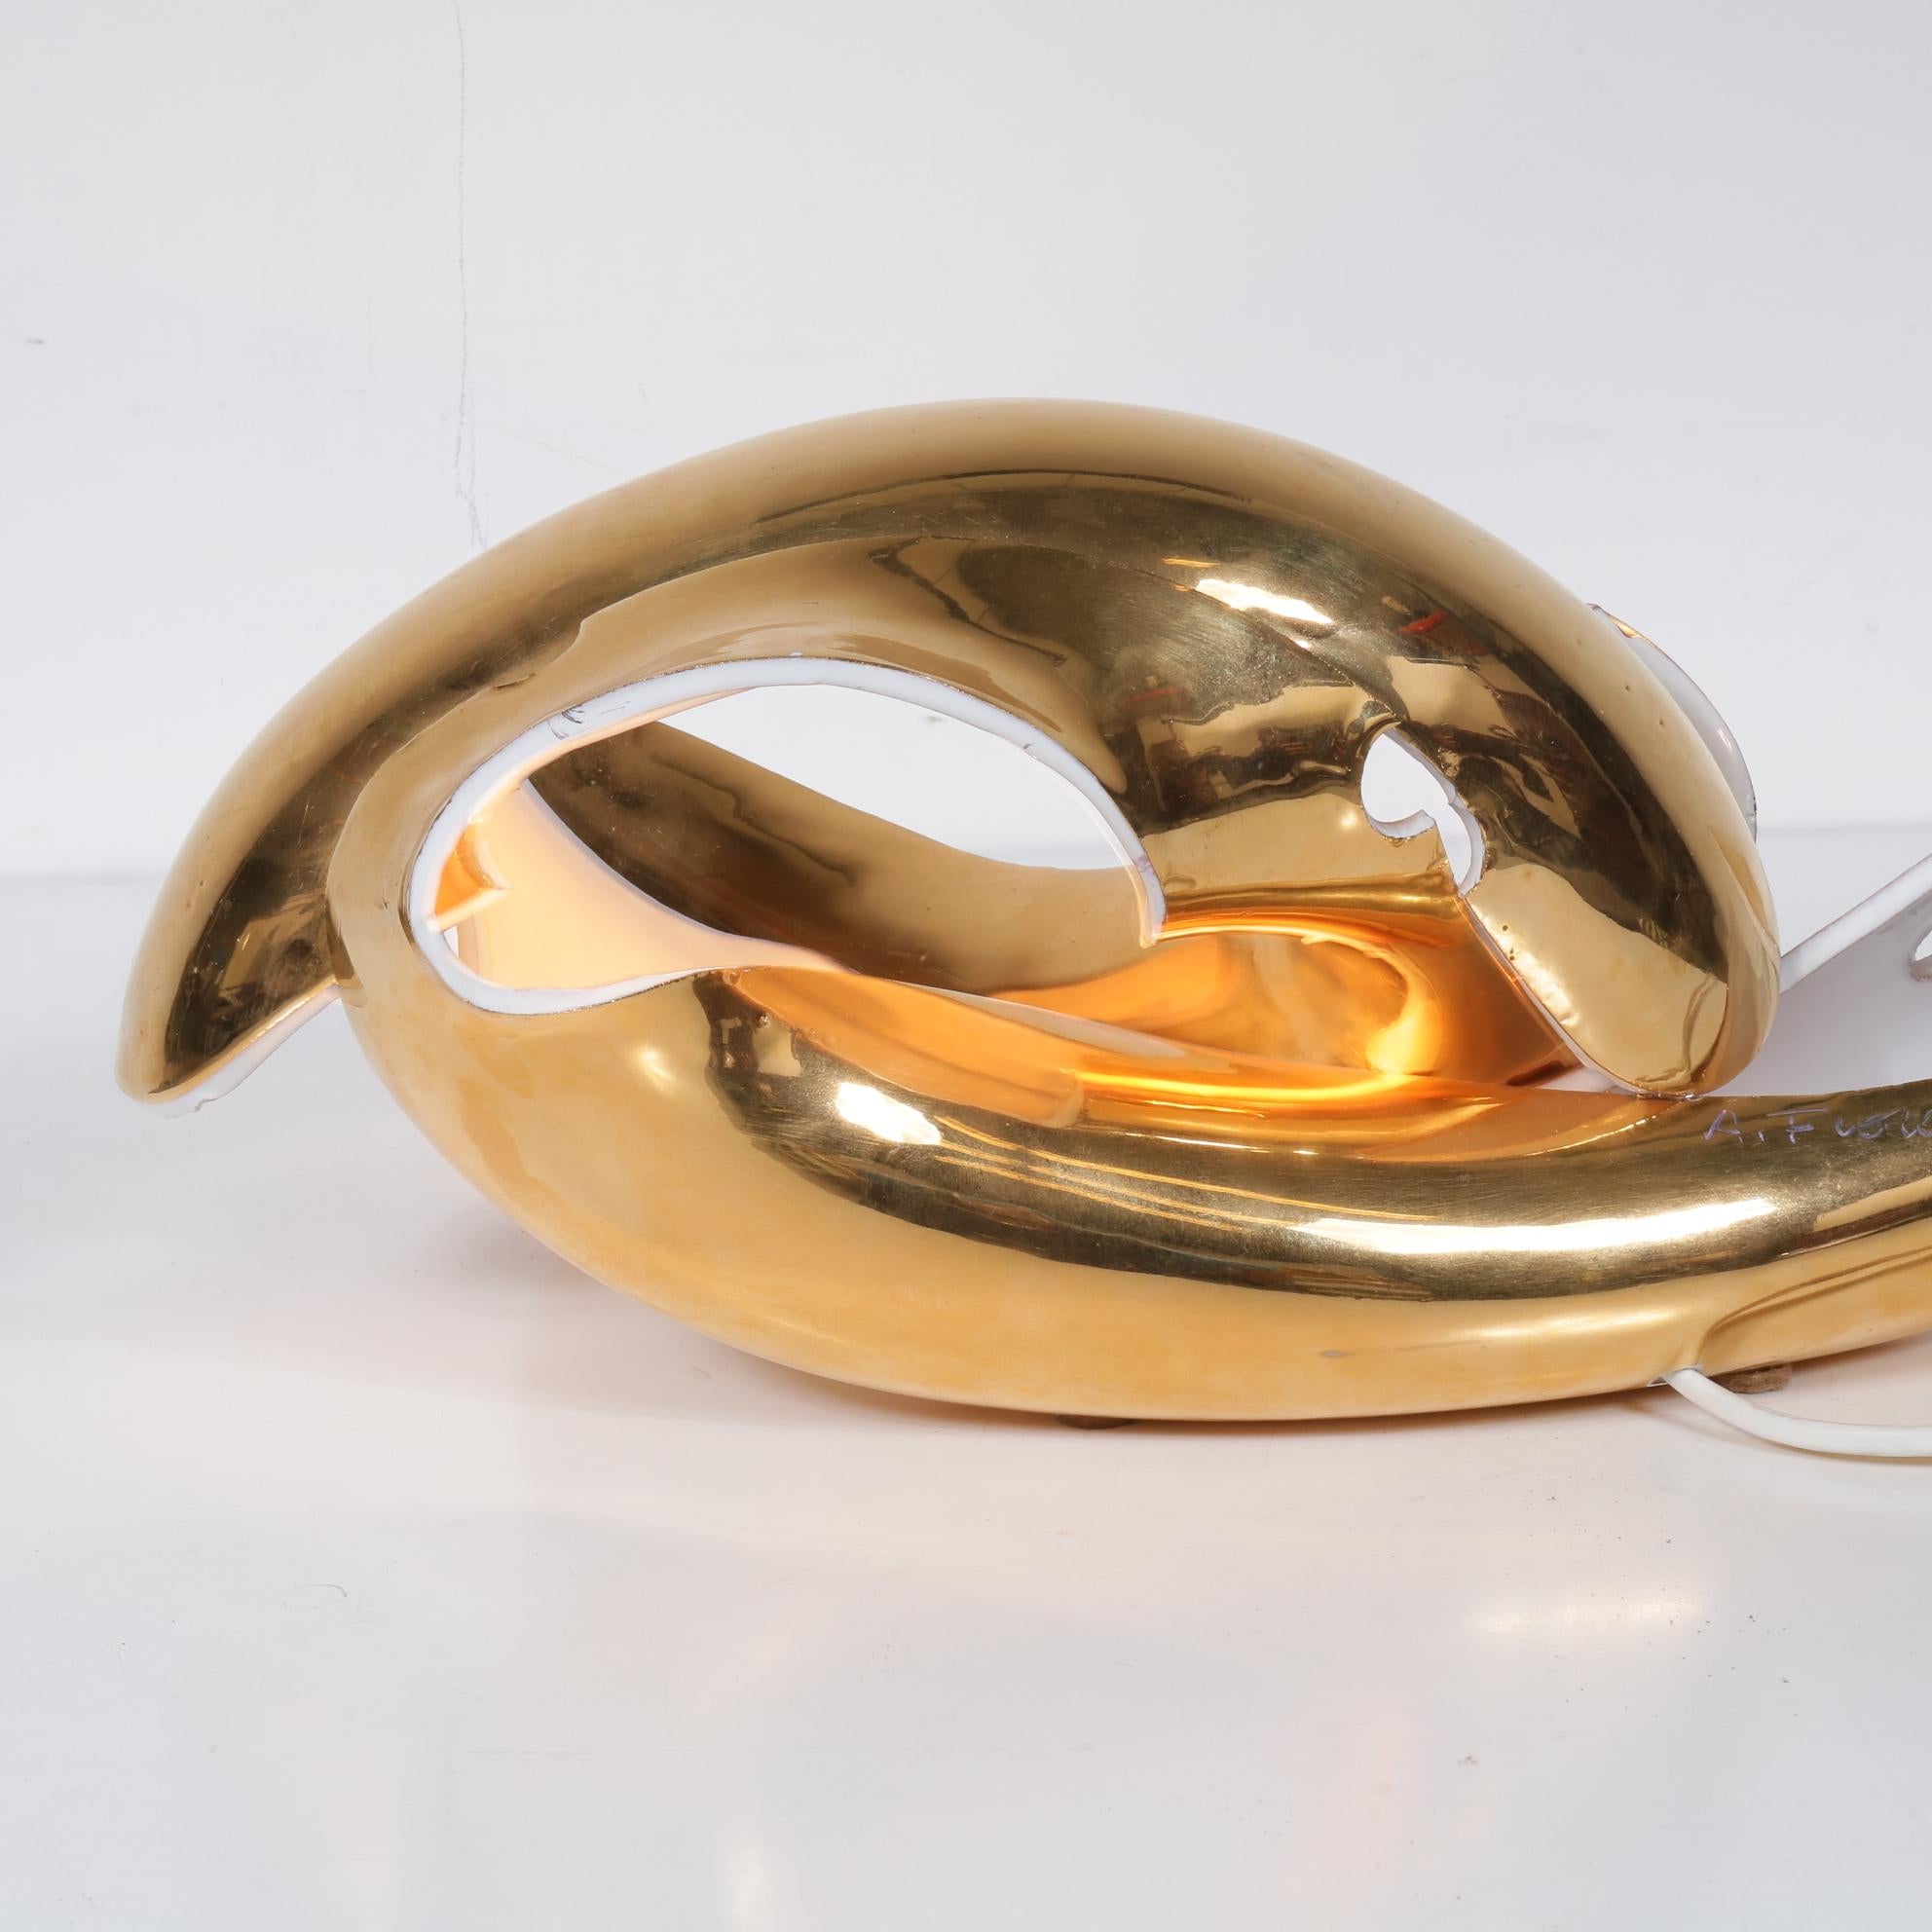 Gold Plate Sculptural Table Light by Amadeo Fiorese for Cermiche Fiorese, Italy 1960 For Sale